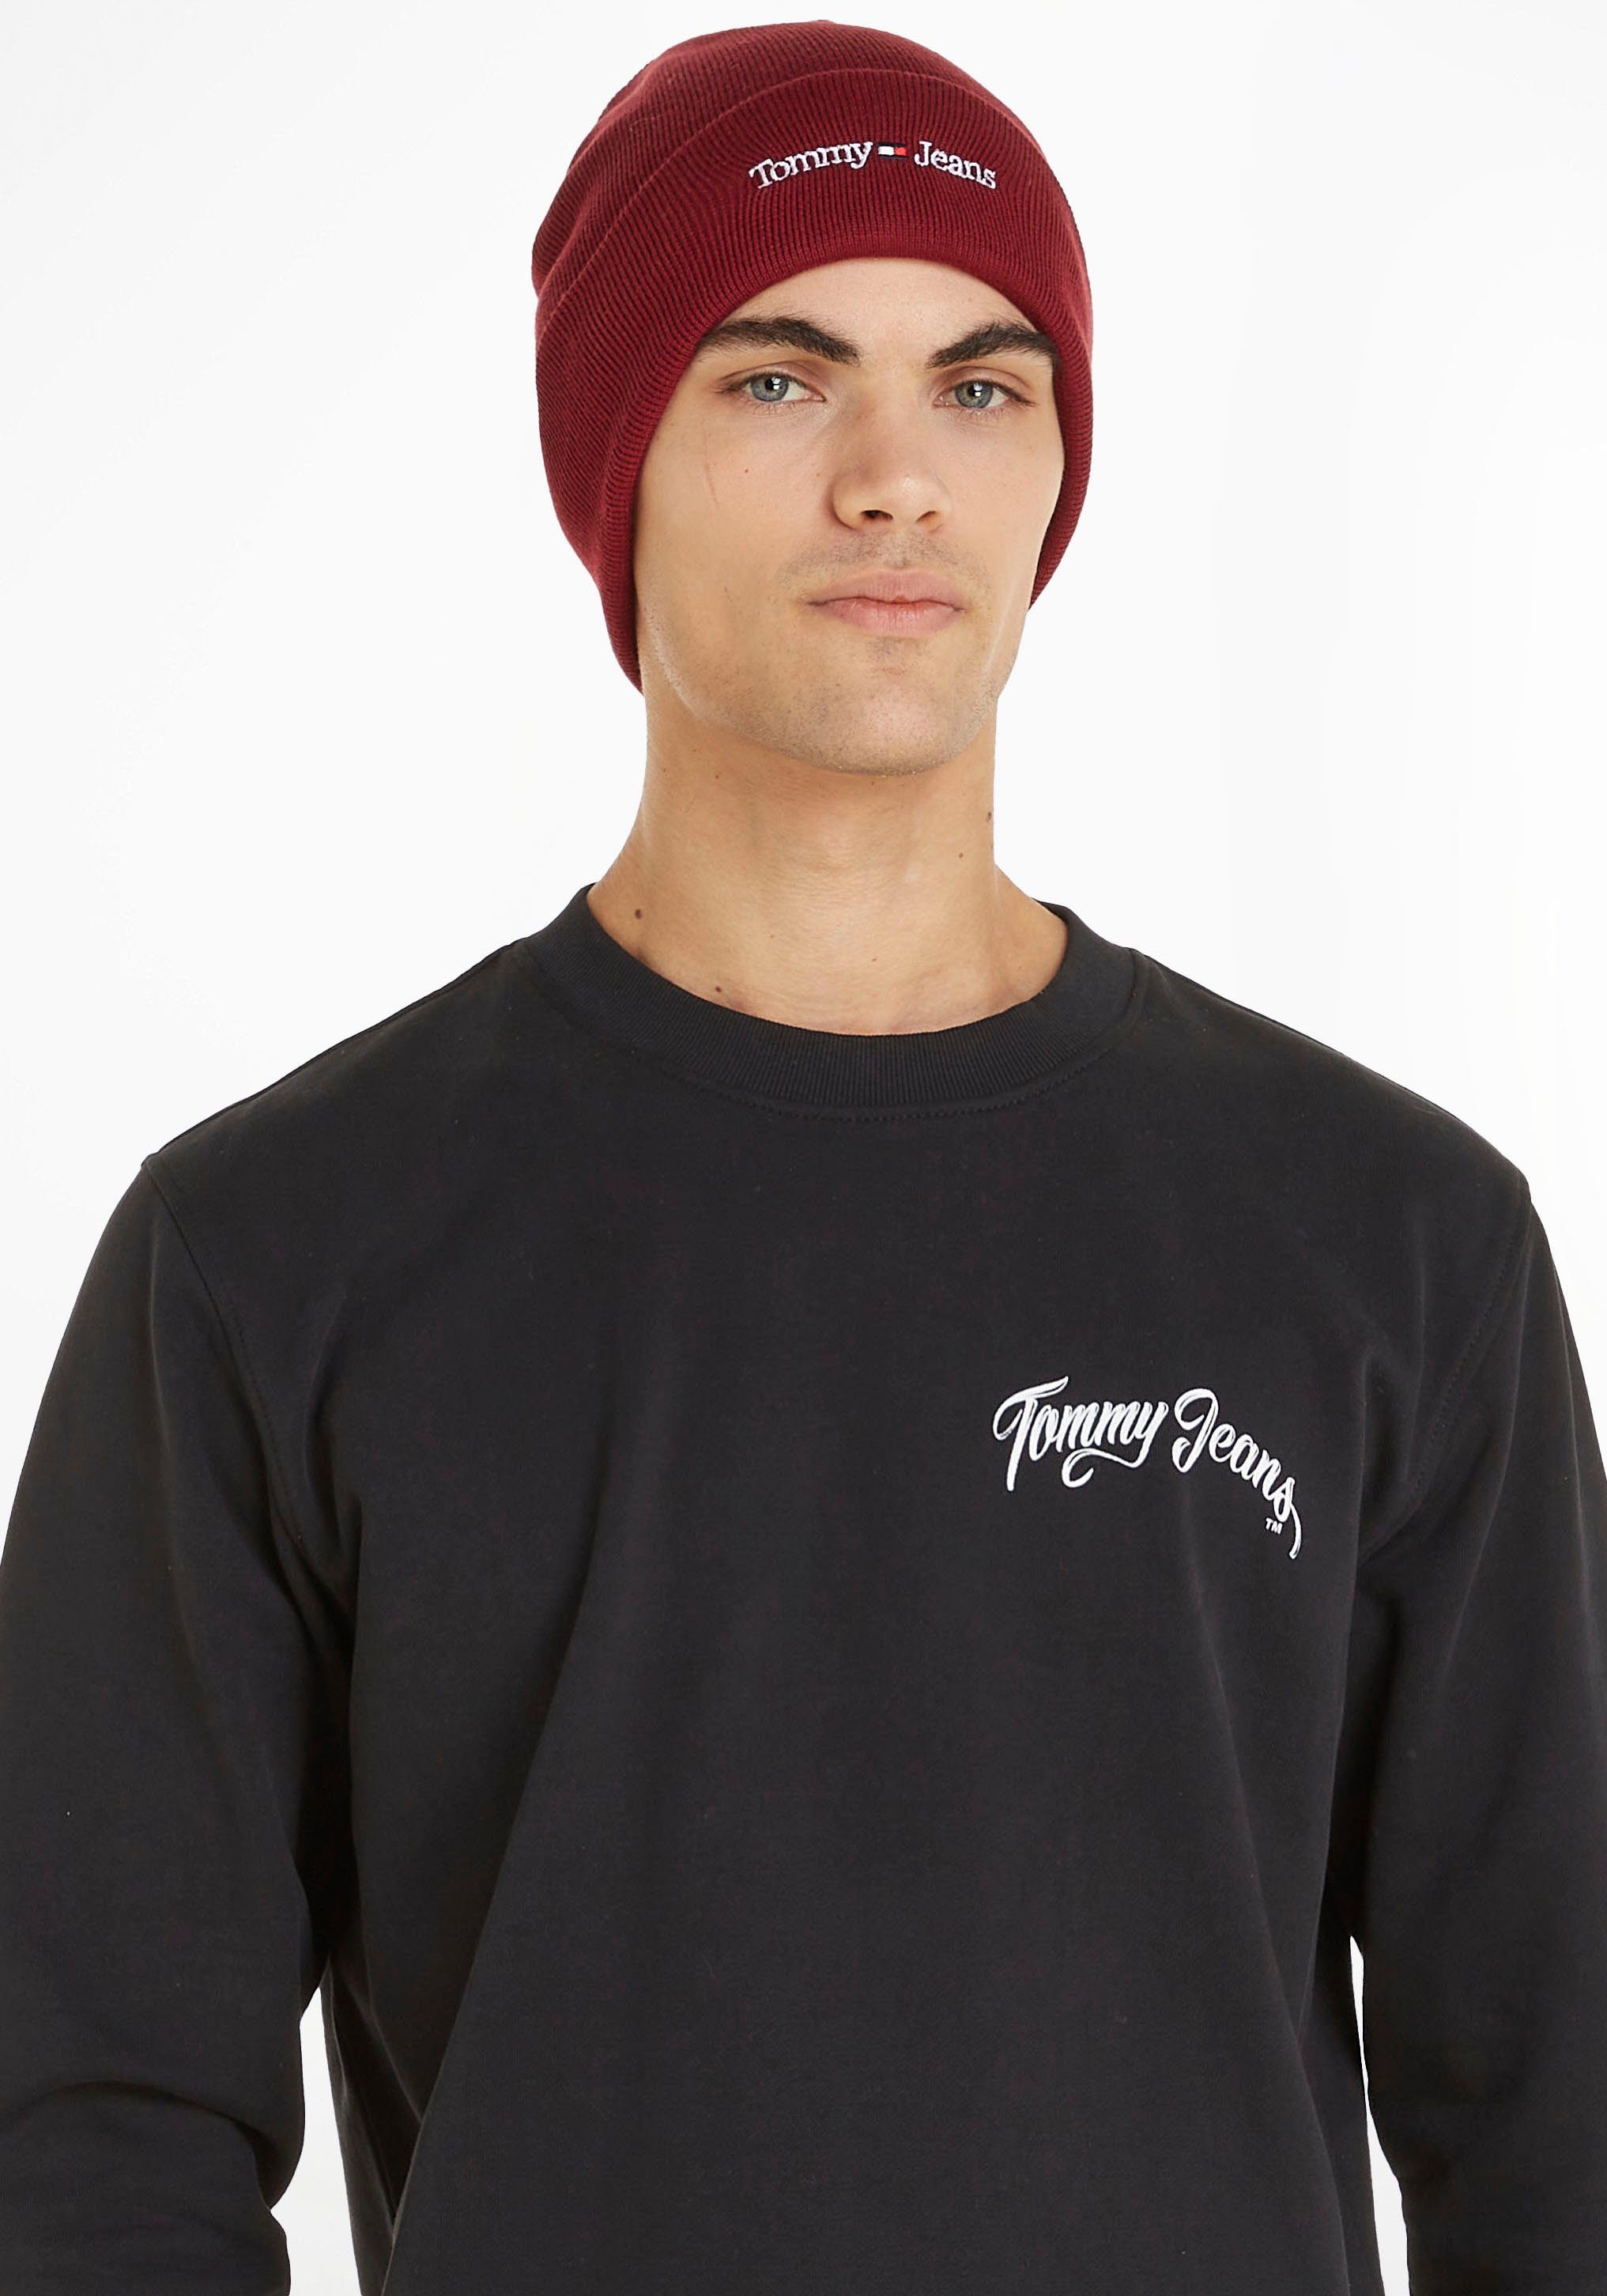 BEANIE SPORT Jeans Tommy Rouge TJM Beanie